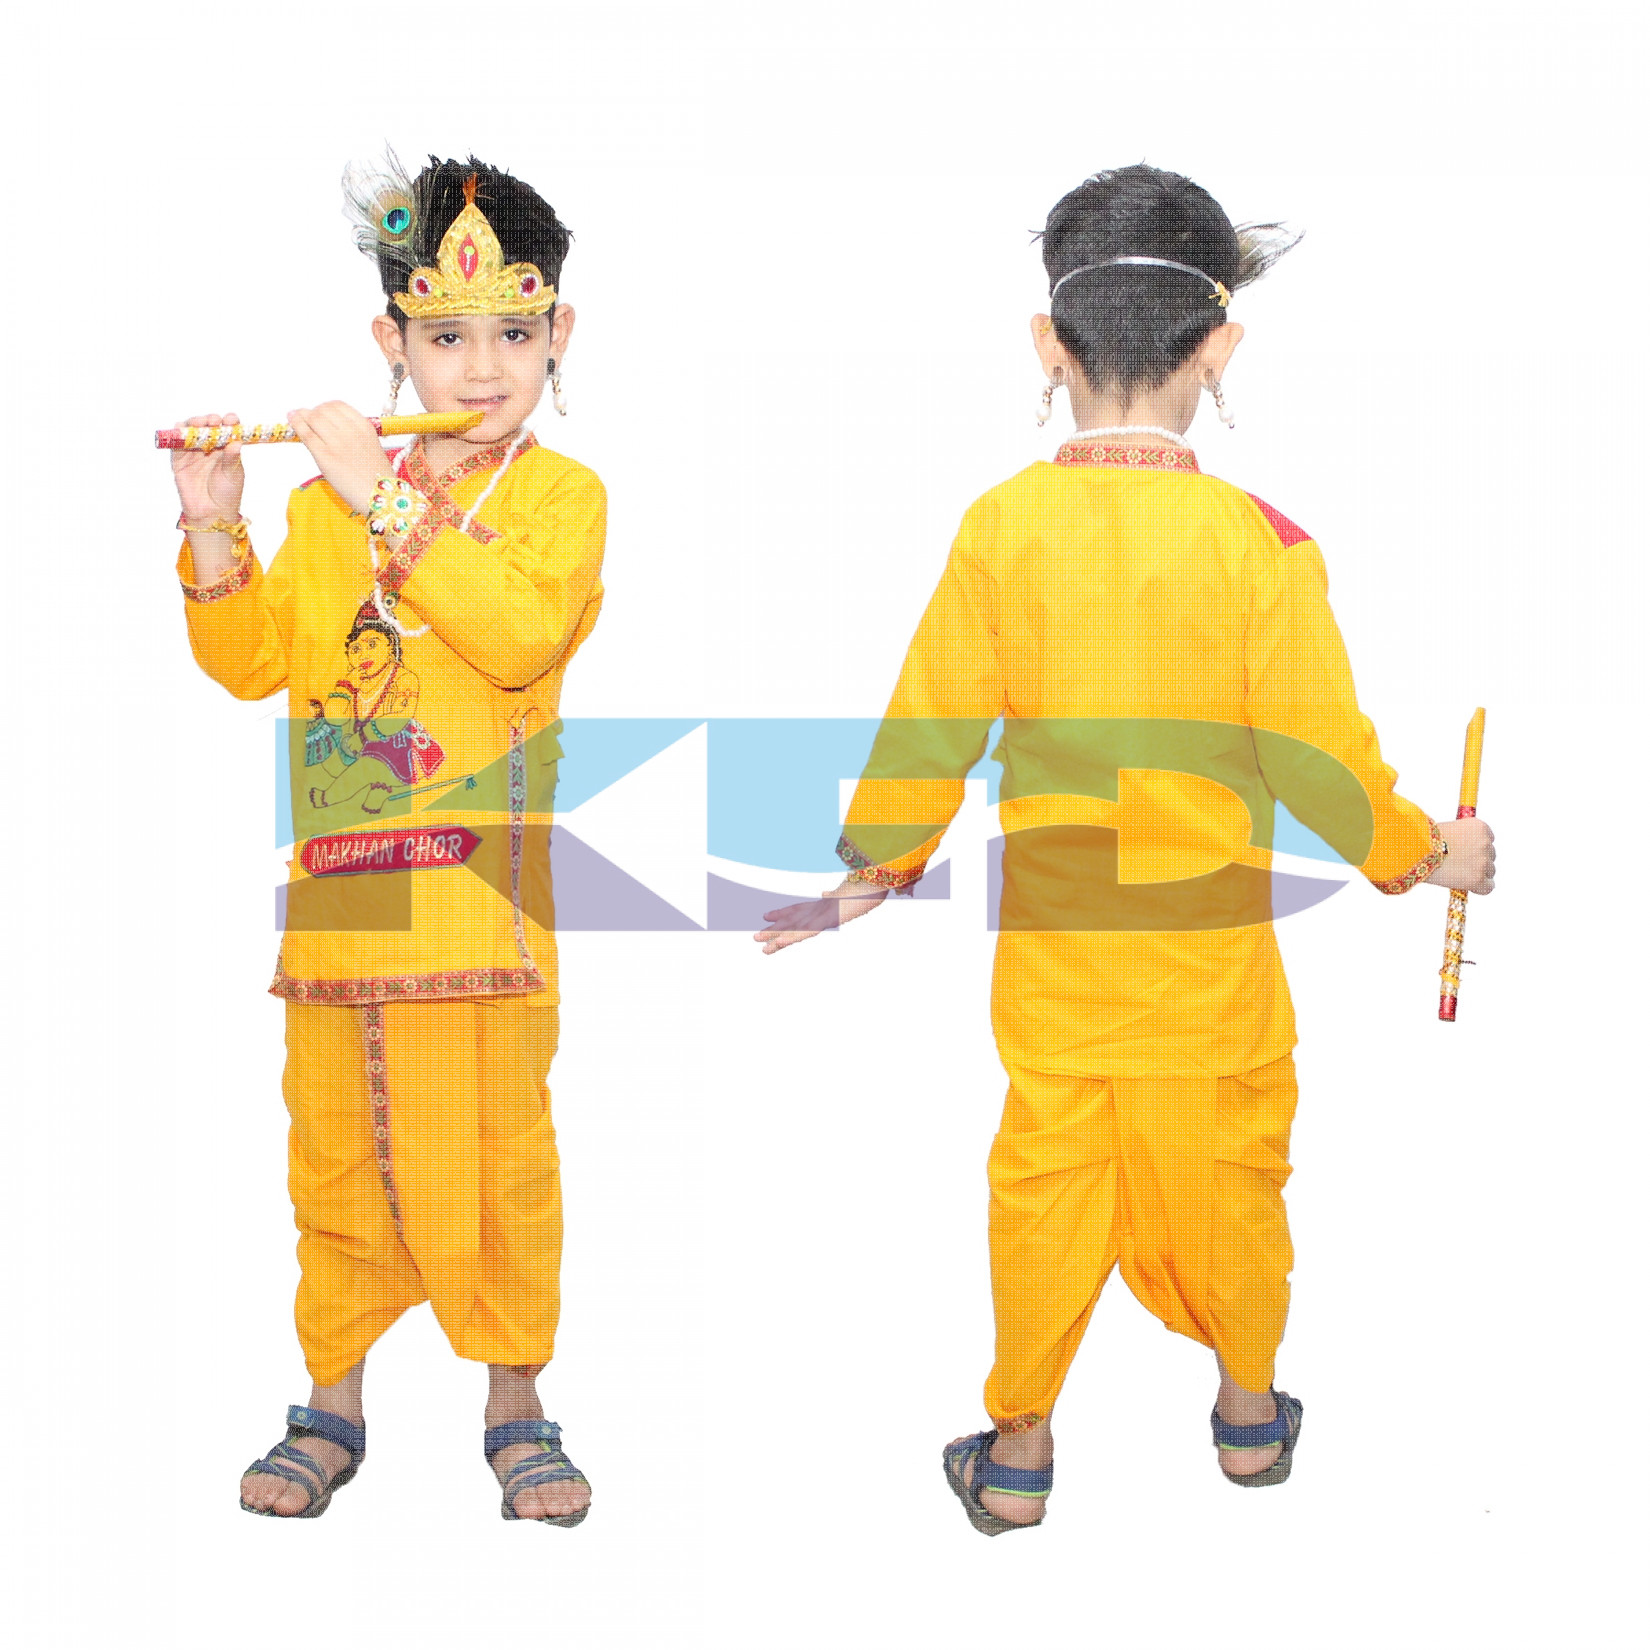 Maakhan Chor Without Jewellery fancy dress for kids,Krishnaleela/Janmashtami/Kanha/Mythological Character for Annual functionTtheme Party/Competition/Stage Shows Dress